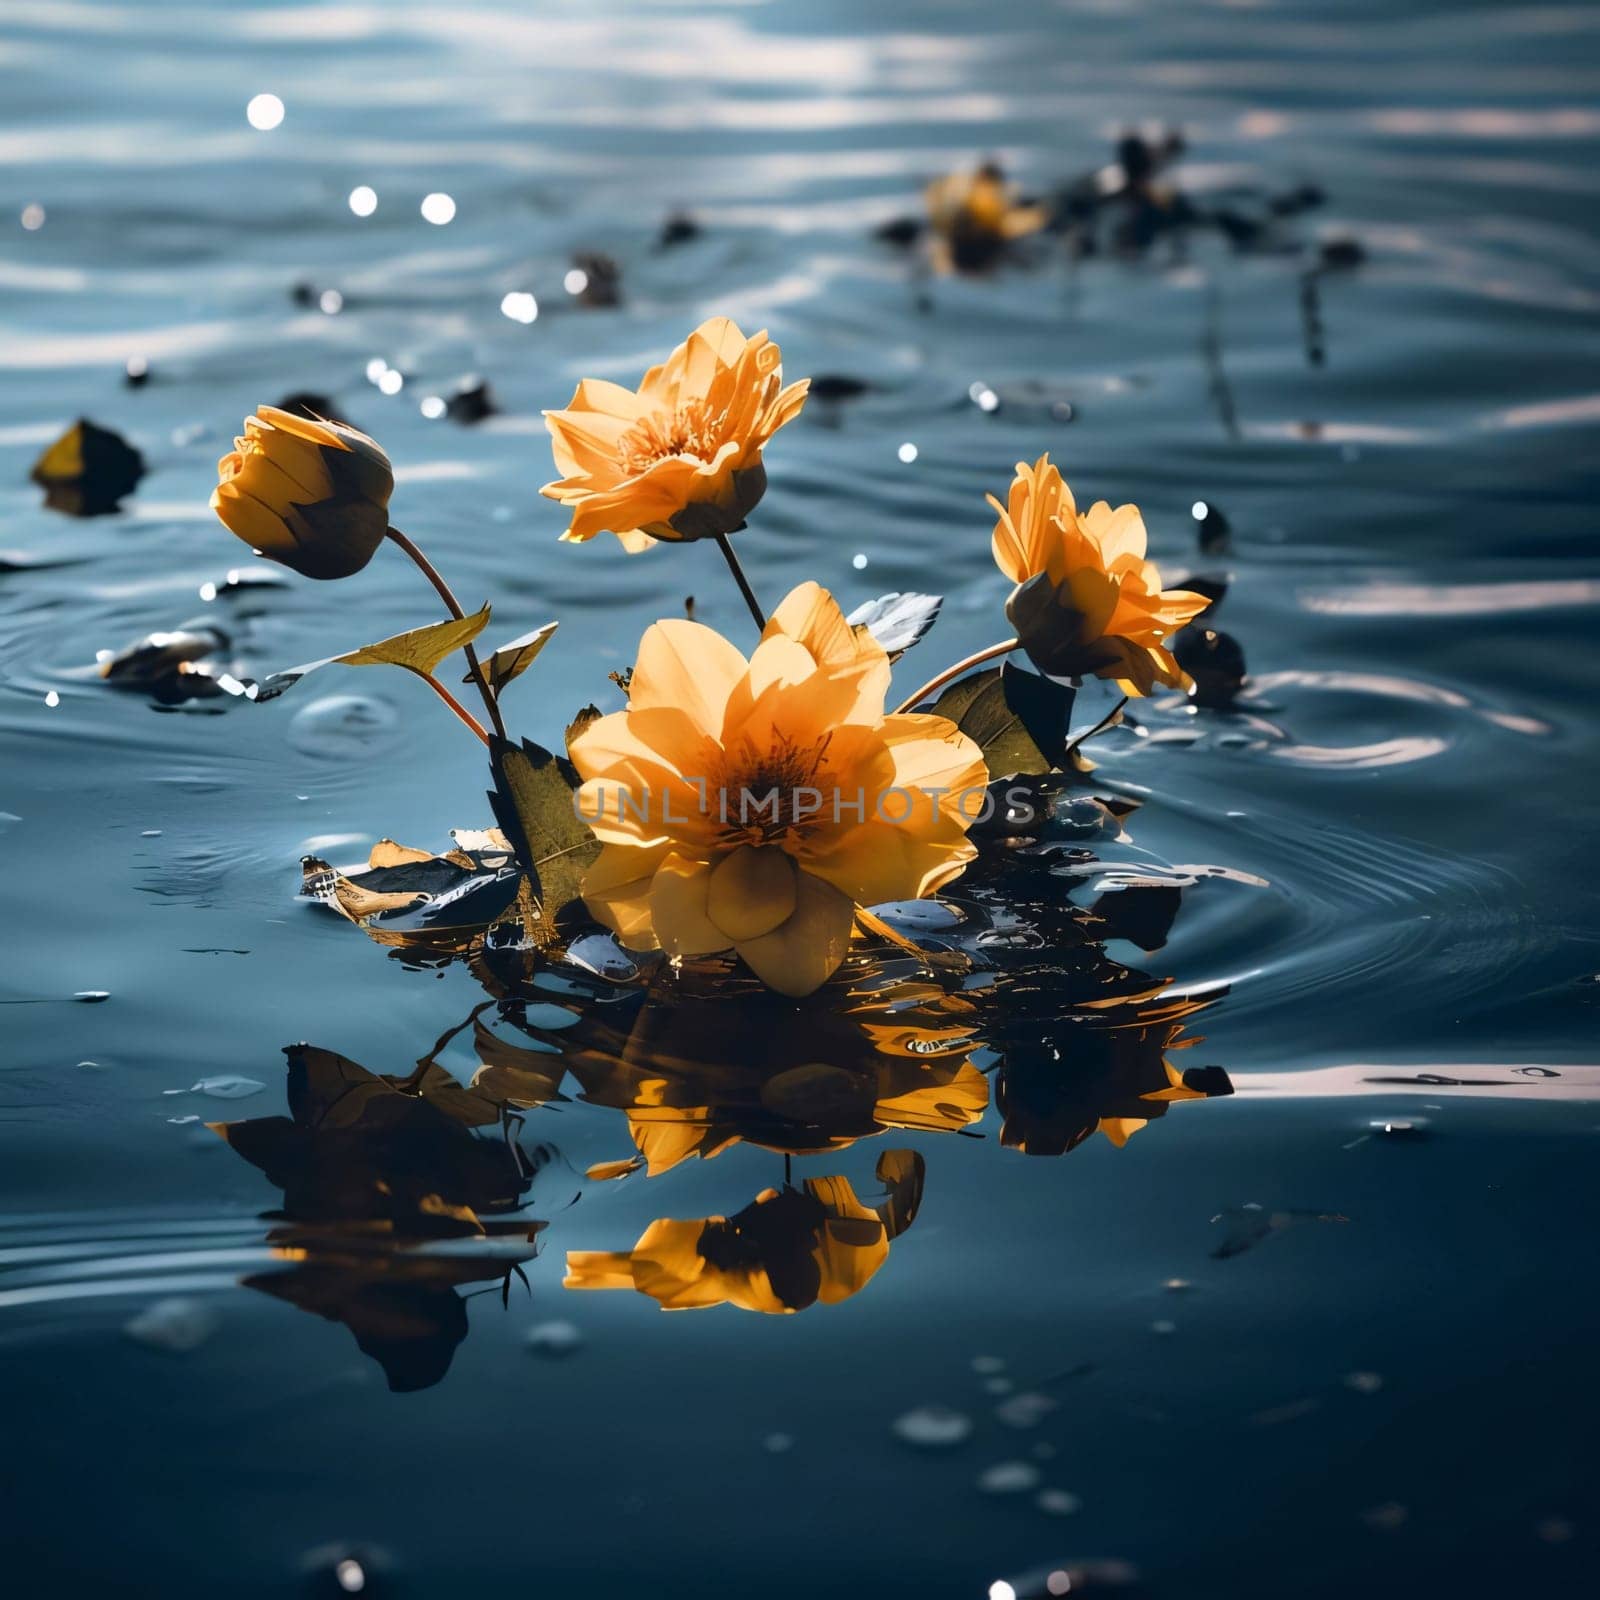 Yellow, orange flowers on the water. Flowering flowers, a symbol of spring, new life. A joyful time of nature waking up to life.